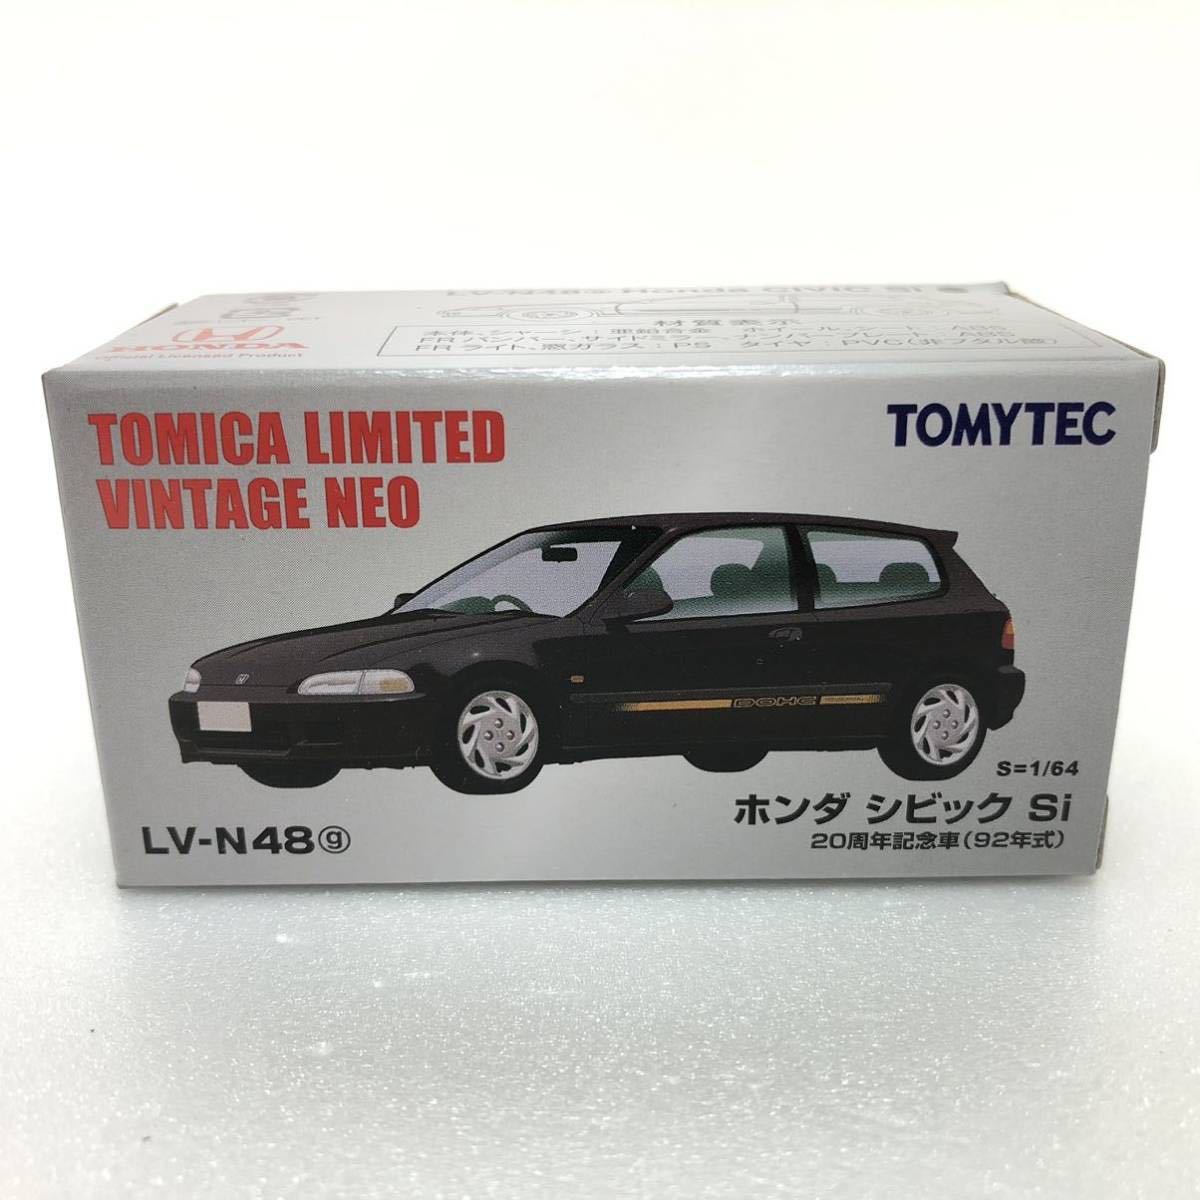 * new goods * unopened * LV-N48g Honda Civic Si 20 anniversary car (92 year ) Tomica Limited Vintage Neo 